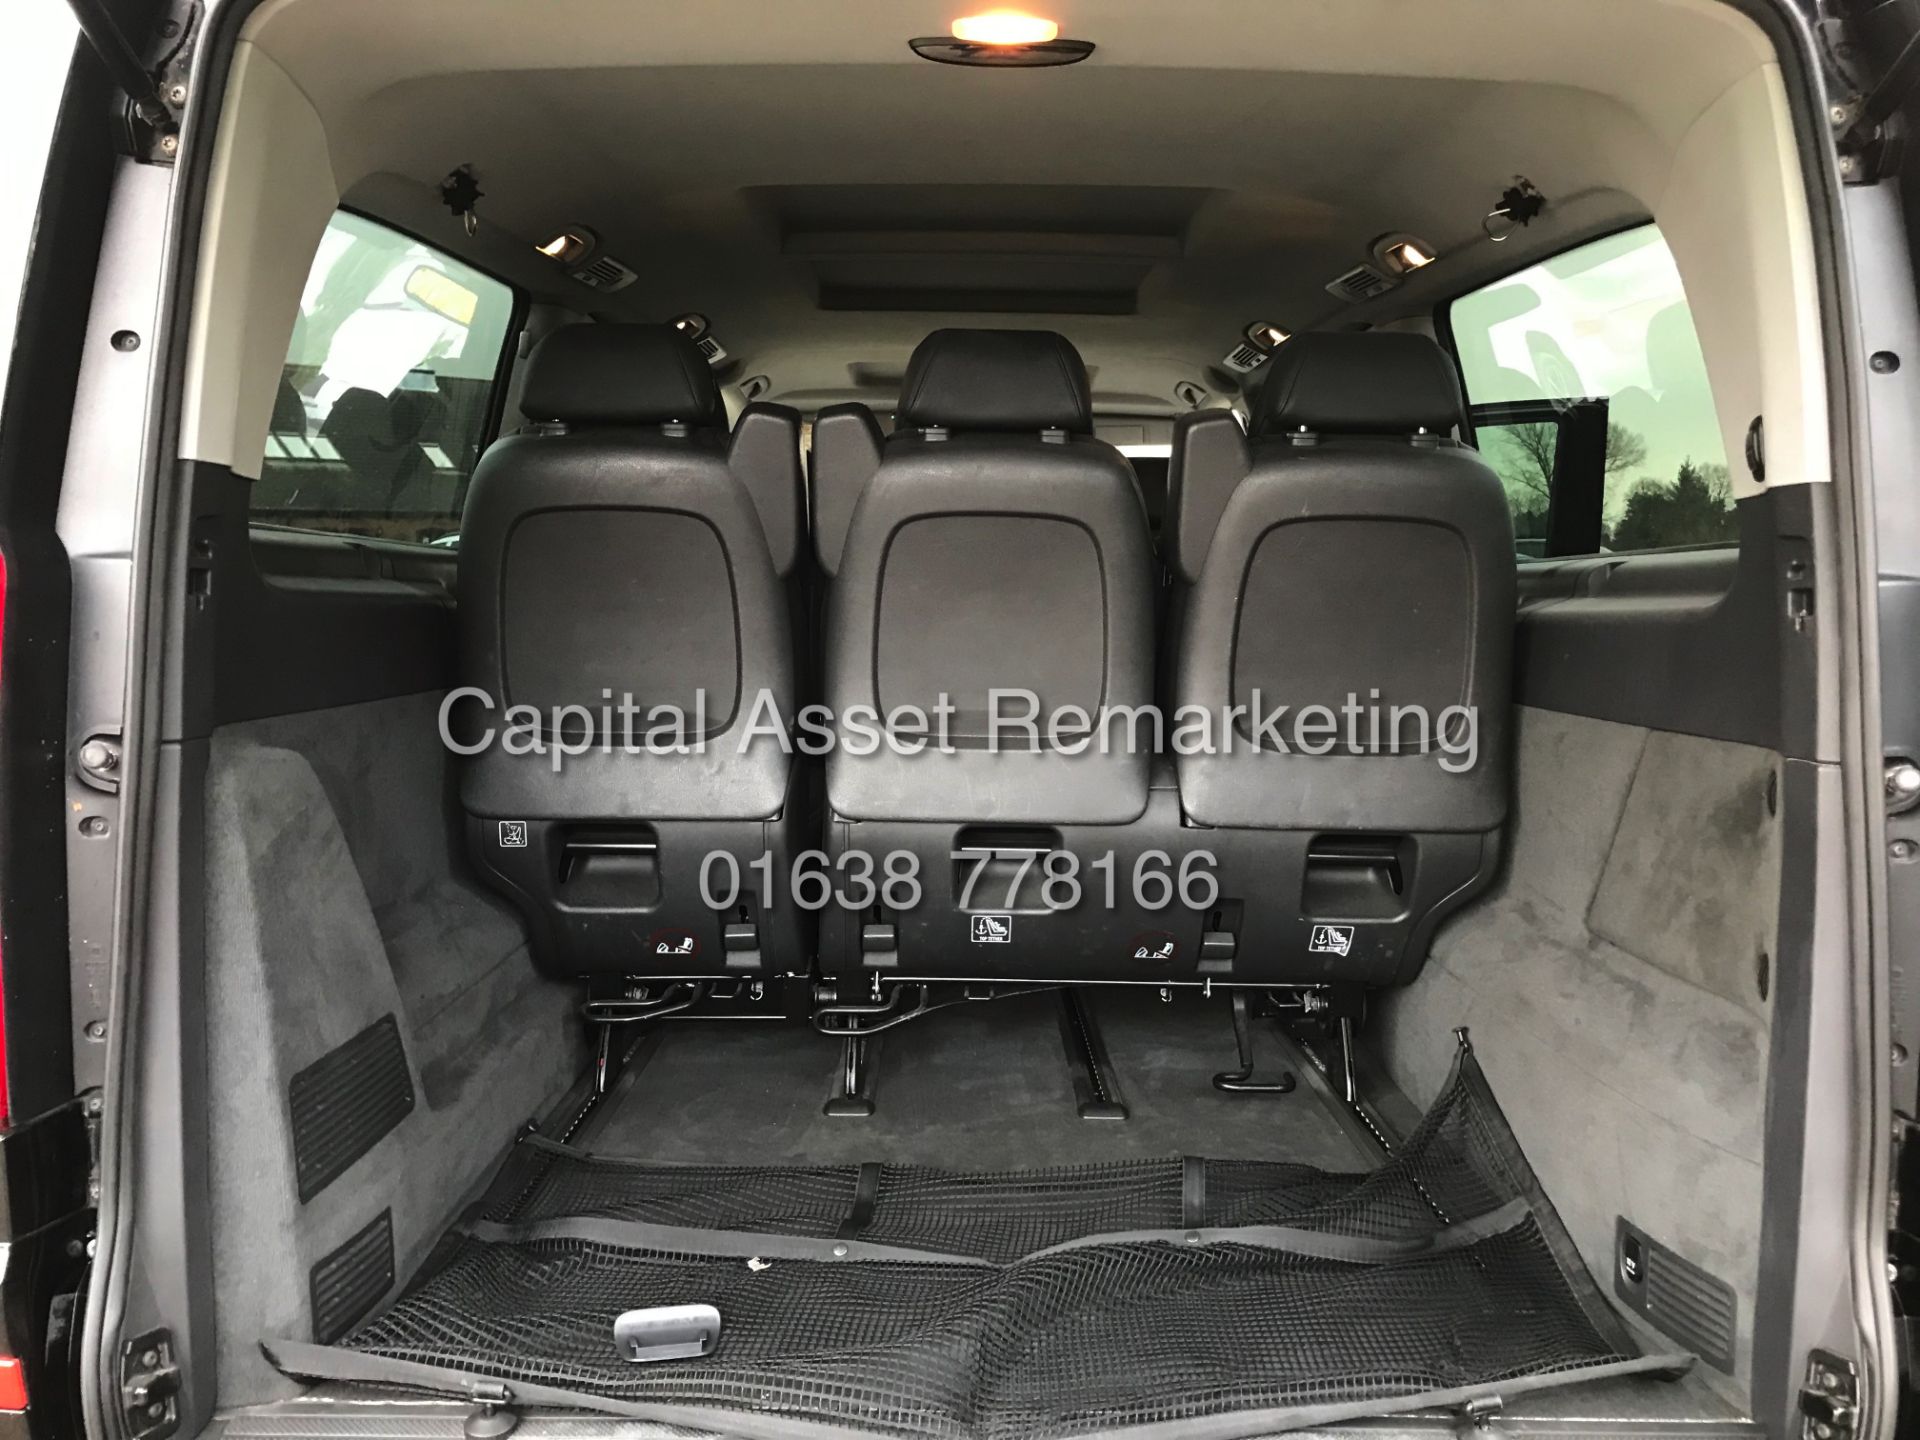 (On Sale) MERCEDES VIANO "AMBIENTE" LONG WHEEL BASE 8 SEATER LUXUARY PEOPLE CARRIER - 14 REG!!! - Image 26 of 28